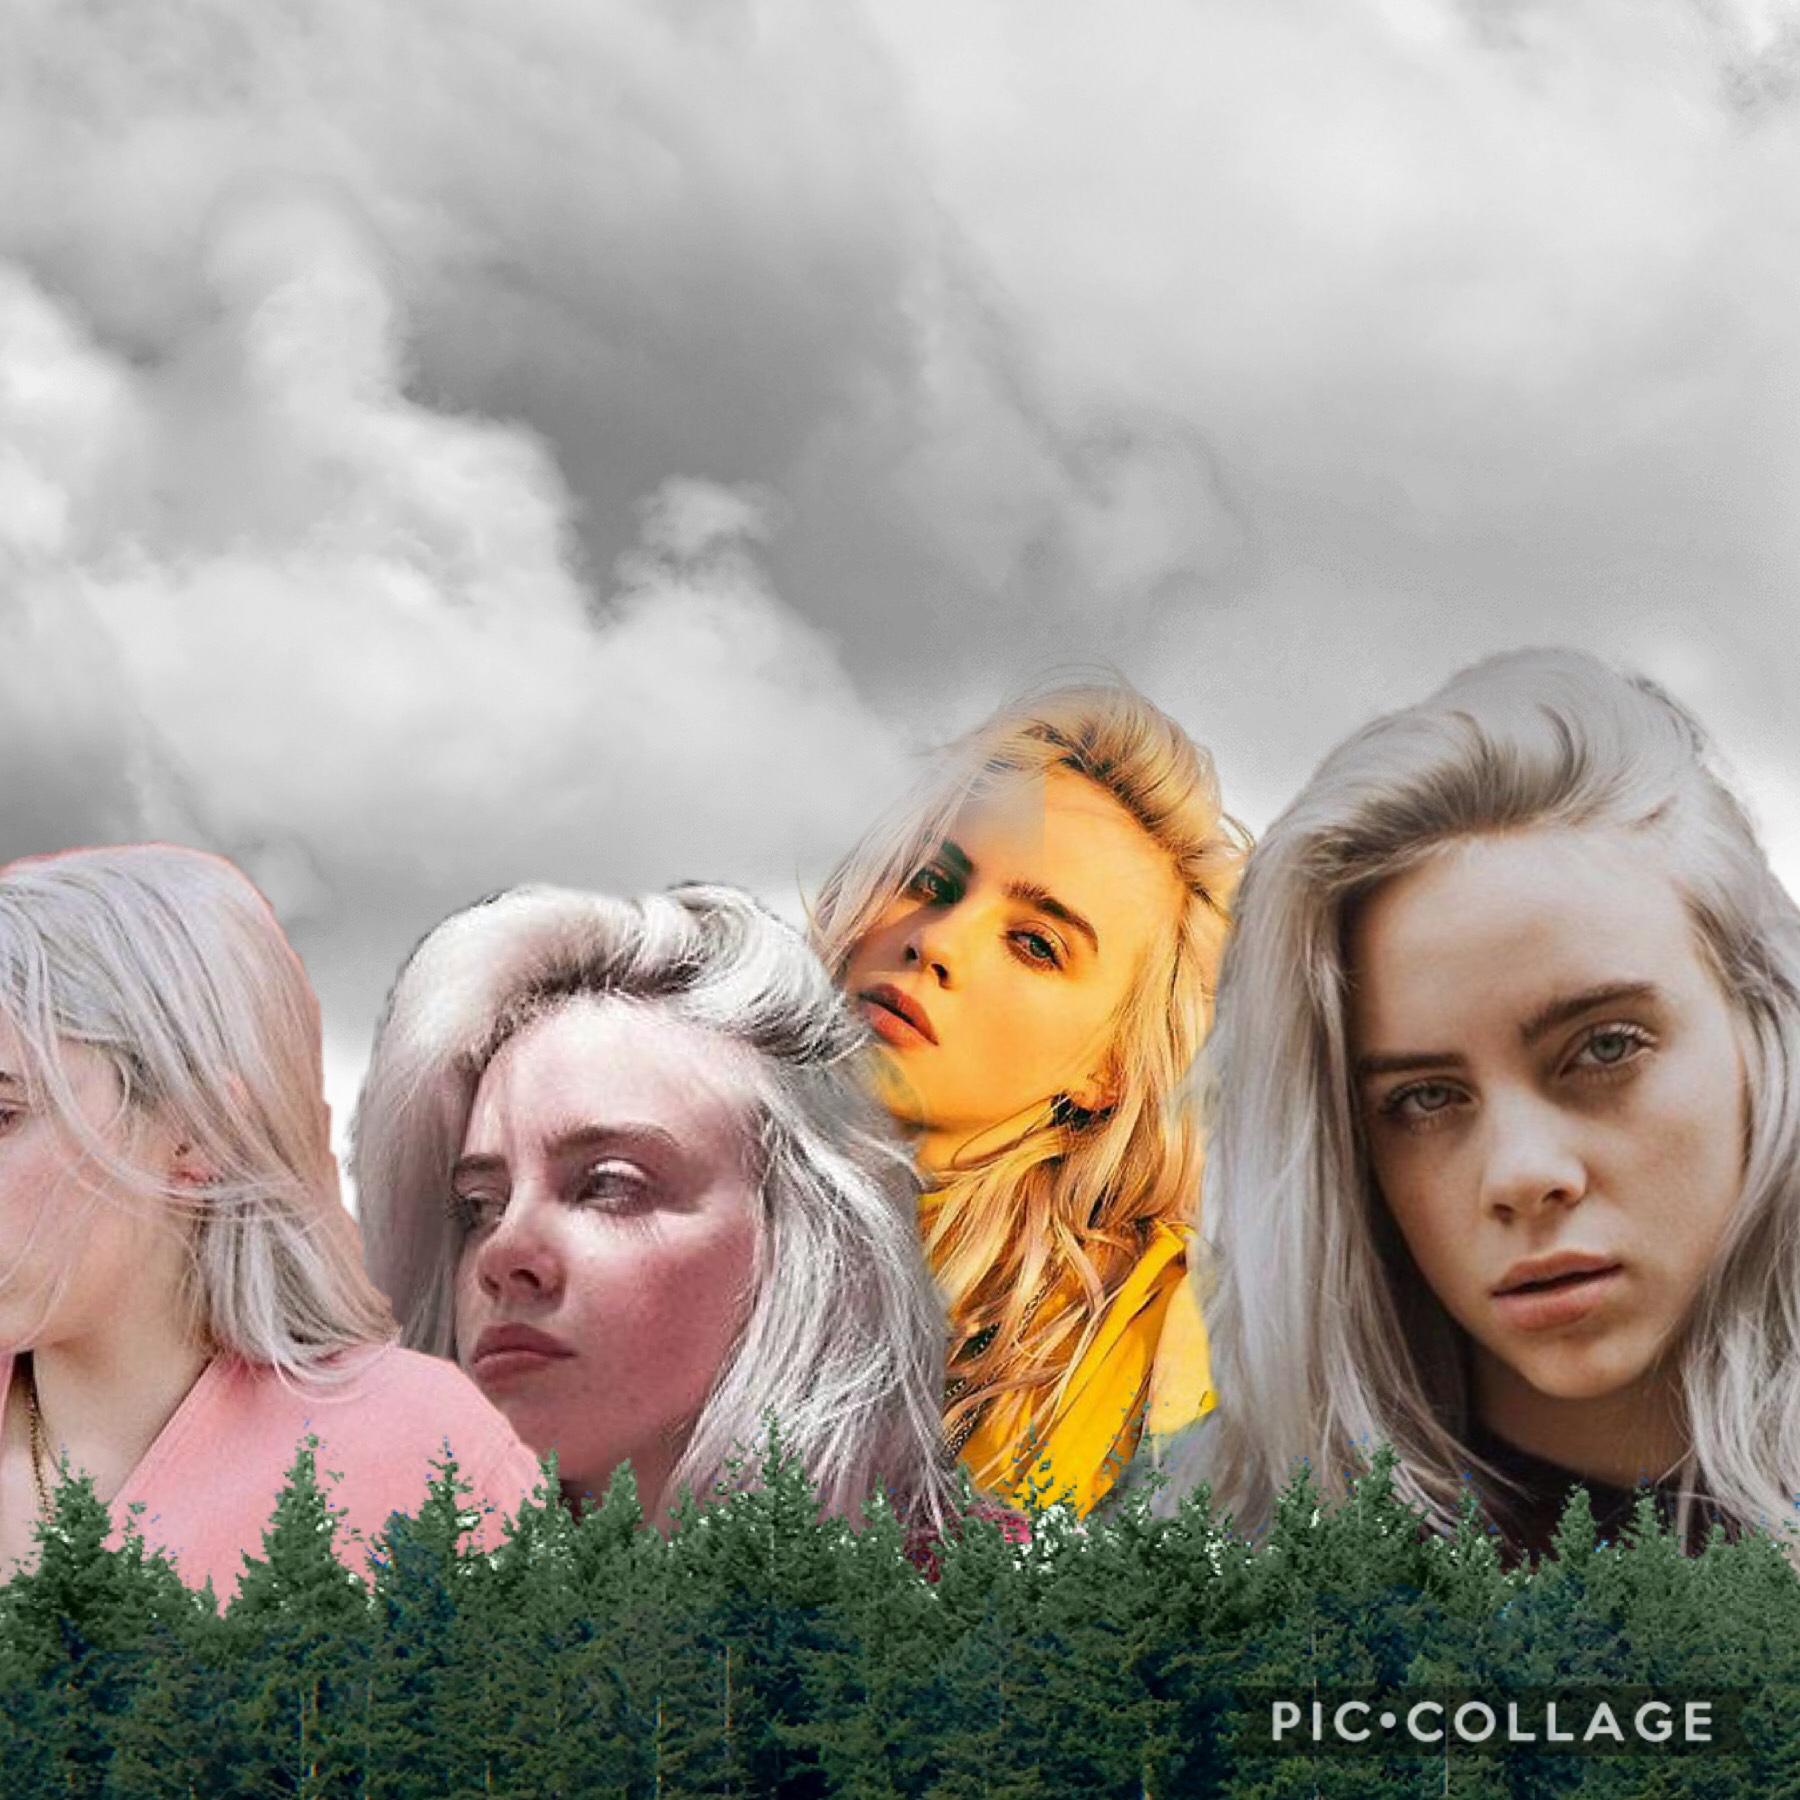 one of my favorite collages so far! billie elish gives such a good asthetic tbh